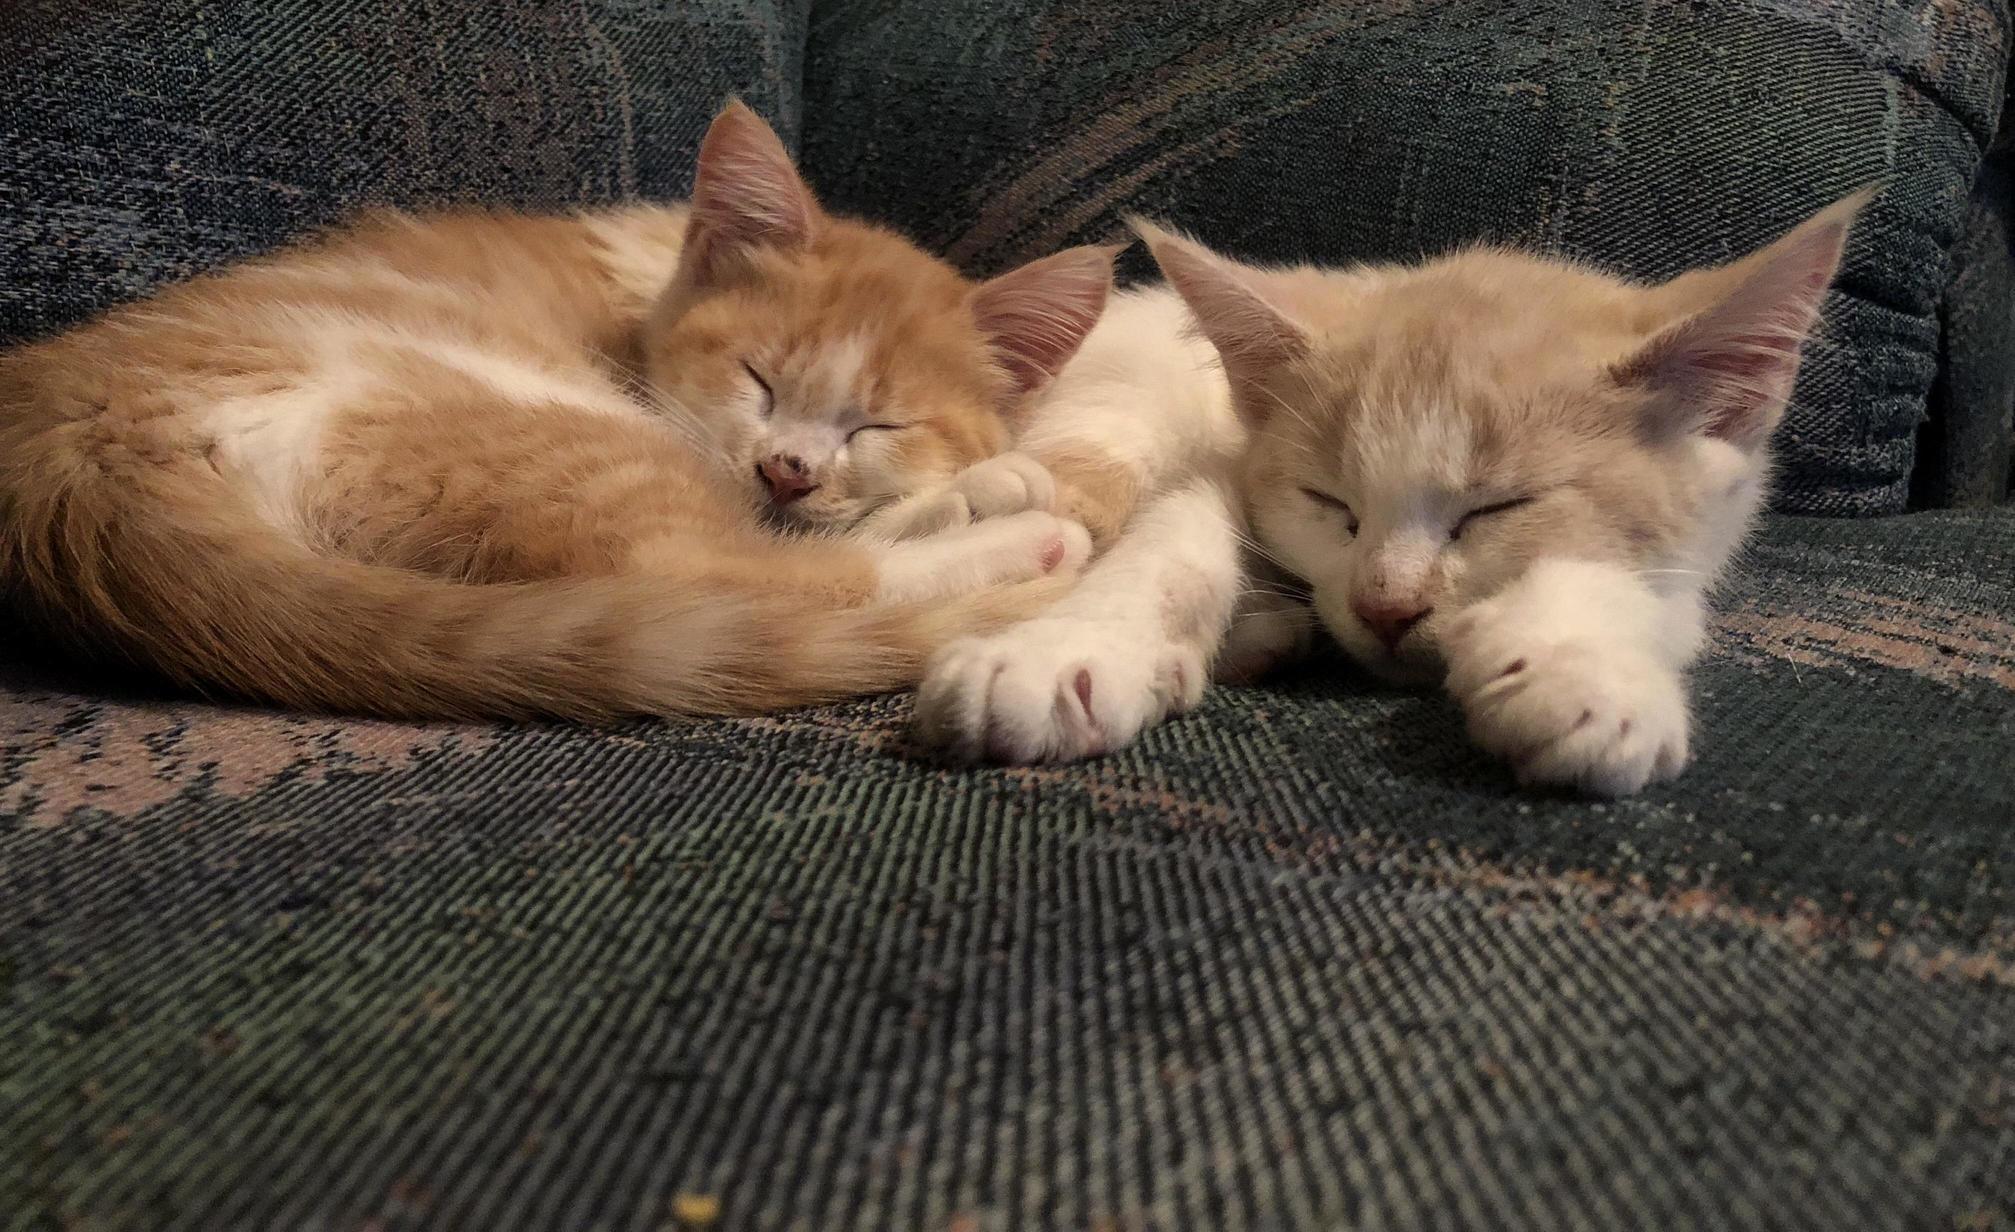 Adopted these two sisters recently. any advice for a first time pet owner